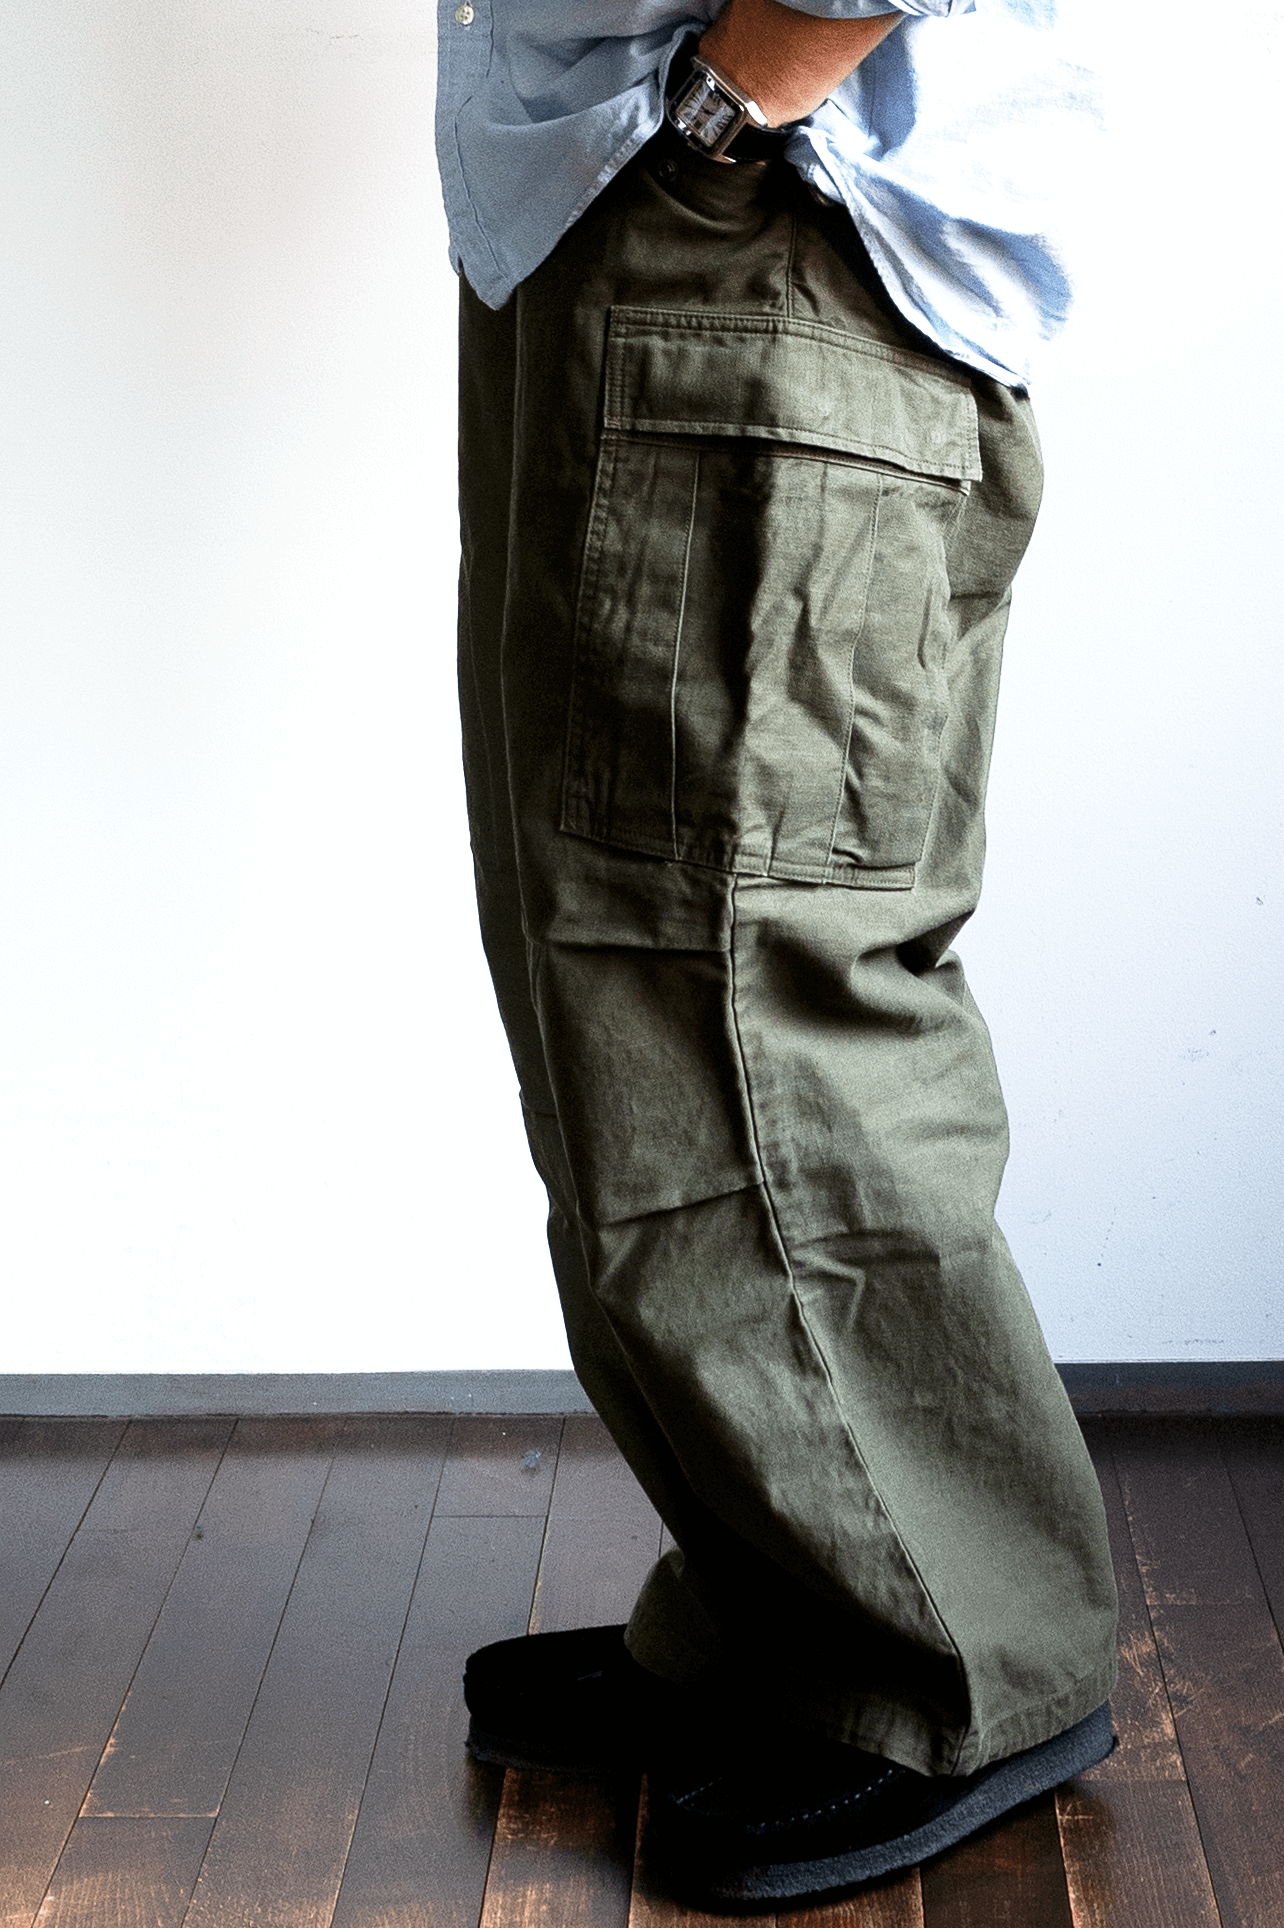 Sewing Chop O’alls FIELD SHELL TROUSERS